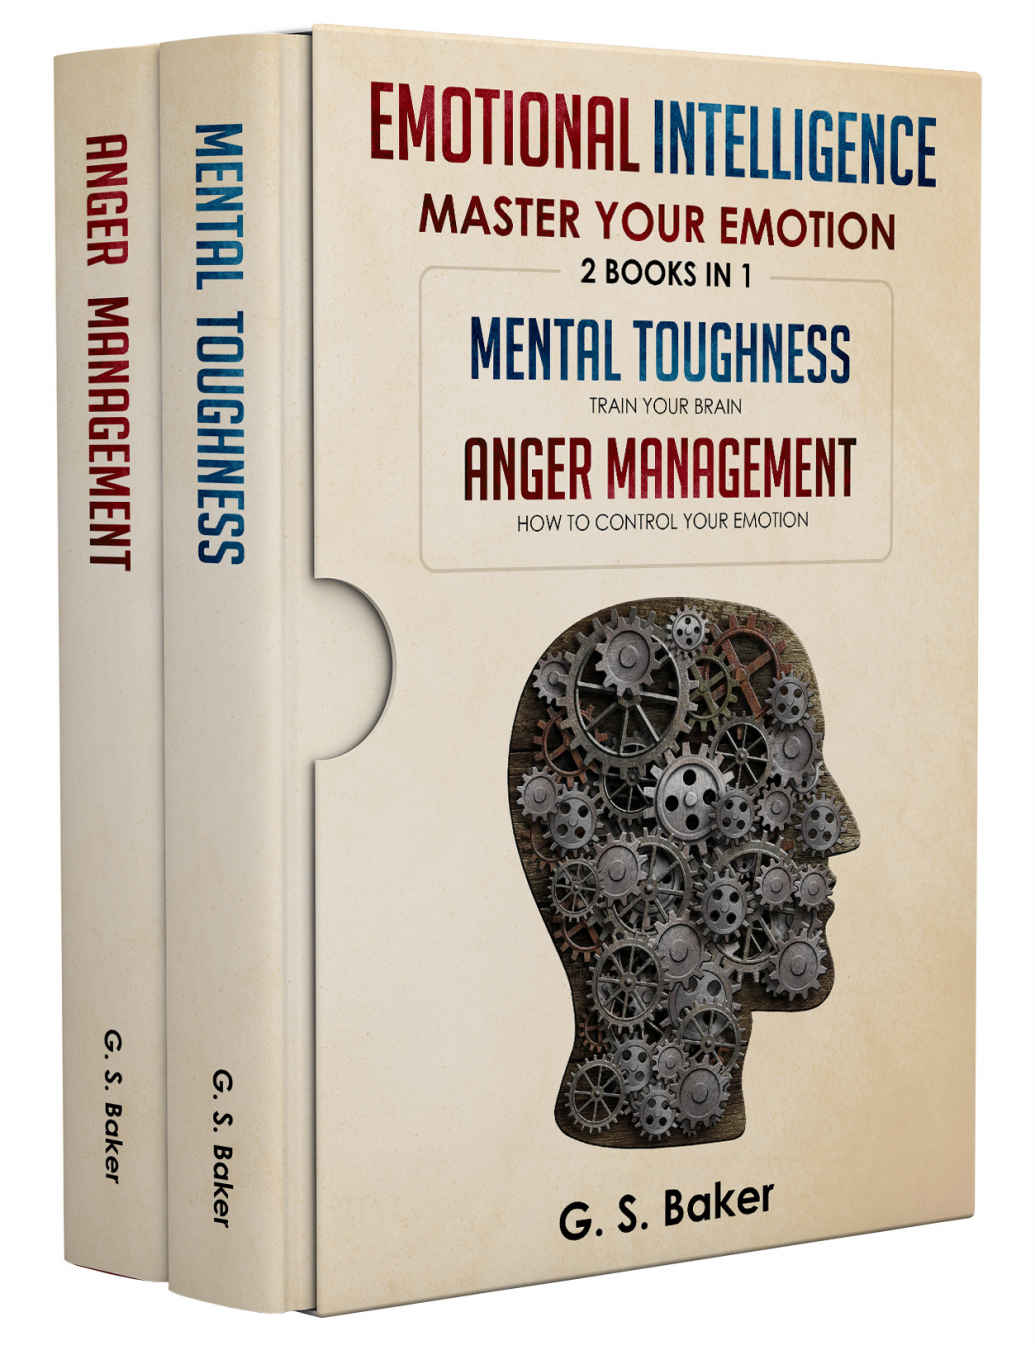 Emotional Intelligence Master Your Emotion-2 Books in 1-: Mental Toughness - Train Your Brain- Anger Management - How to Control Your Emotion-